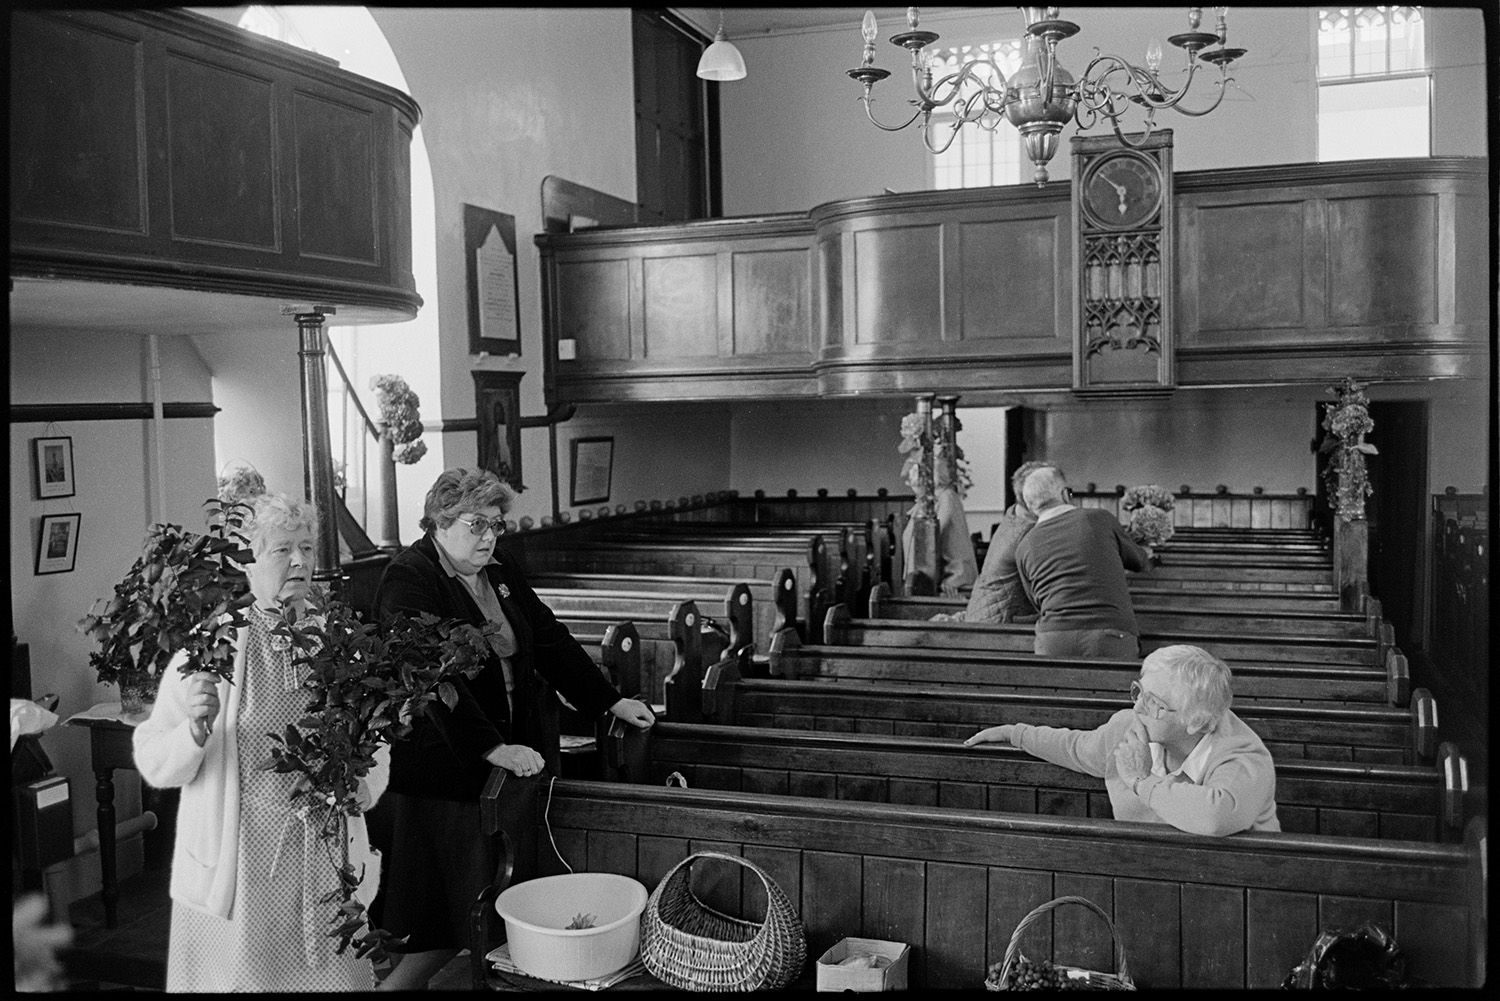 Congregational chapel interior, man playing organ to people decorating at Harvest Festival.
[People decorating the Congregational chapel at Chulmleigh with flowers for the Harvest Festival. Rows of wooden pews, a wooden balcony with a clock, and a metal chandelier are visible in the church. Three ladies are talking and one is holding some foliage for a display.]